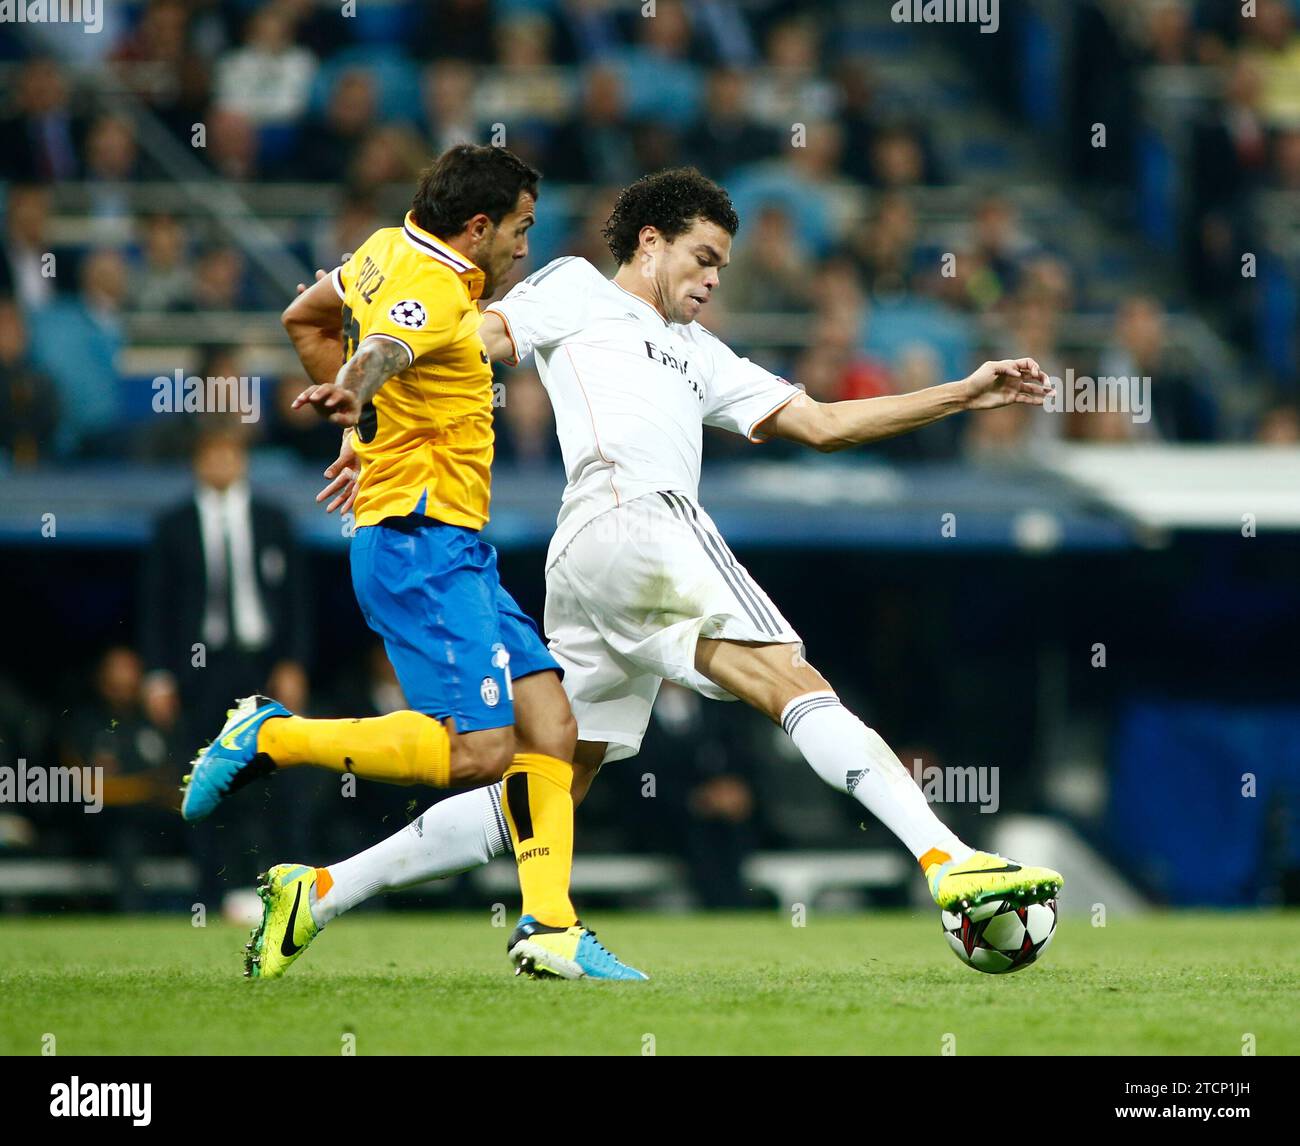 MADRID. October 23, 2013. Pepe in action during the Champions League match between Real Madrid and Juventus at the Santiago Bernabeu stadium. Image Oscar del Pozo ARCHDC. Credit: Album / Archivo ABC / Oscar del Pozo Stock Photo